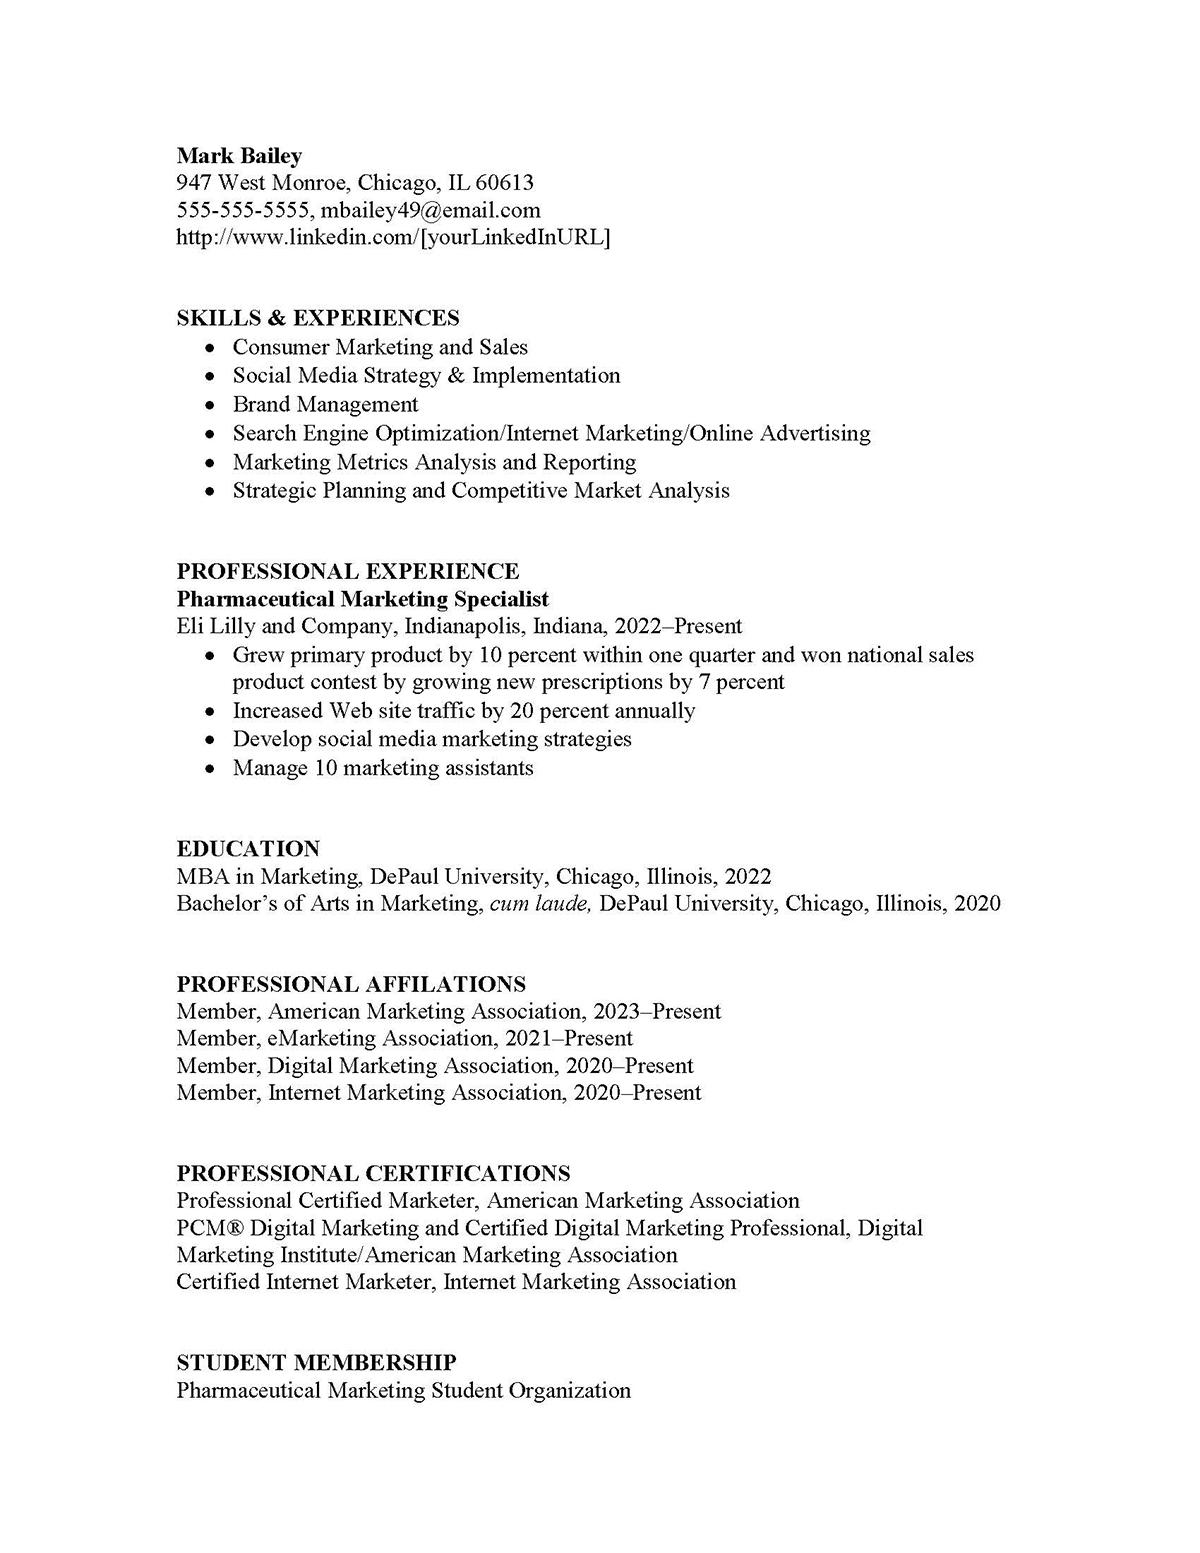 Sample resume: Pharmaceuticals, Mid Experience, Functional